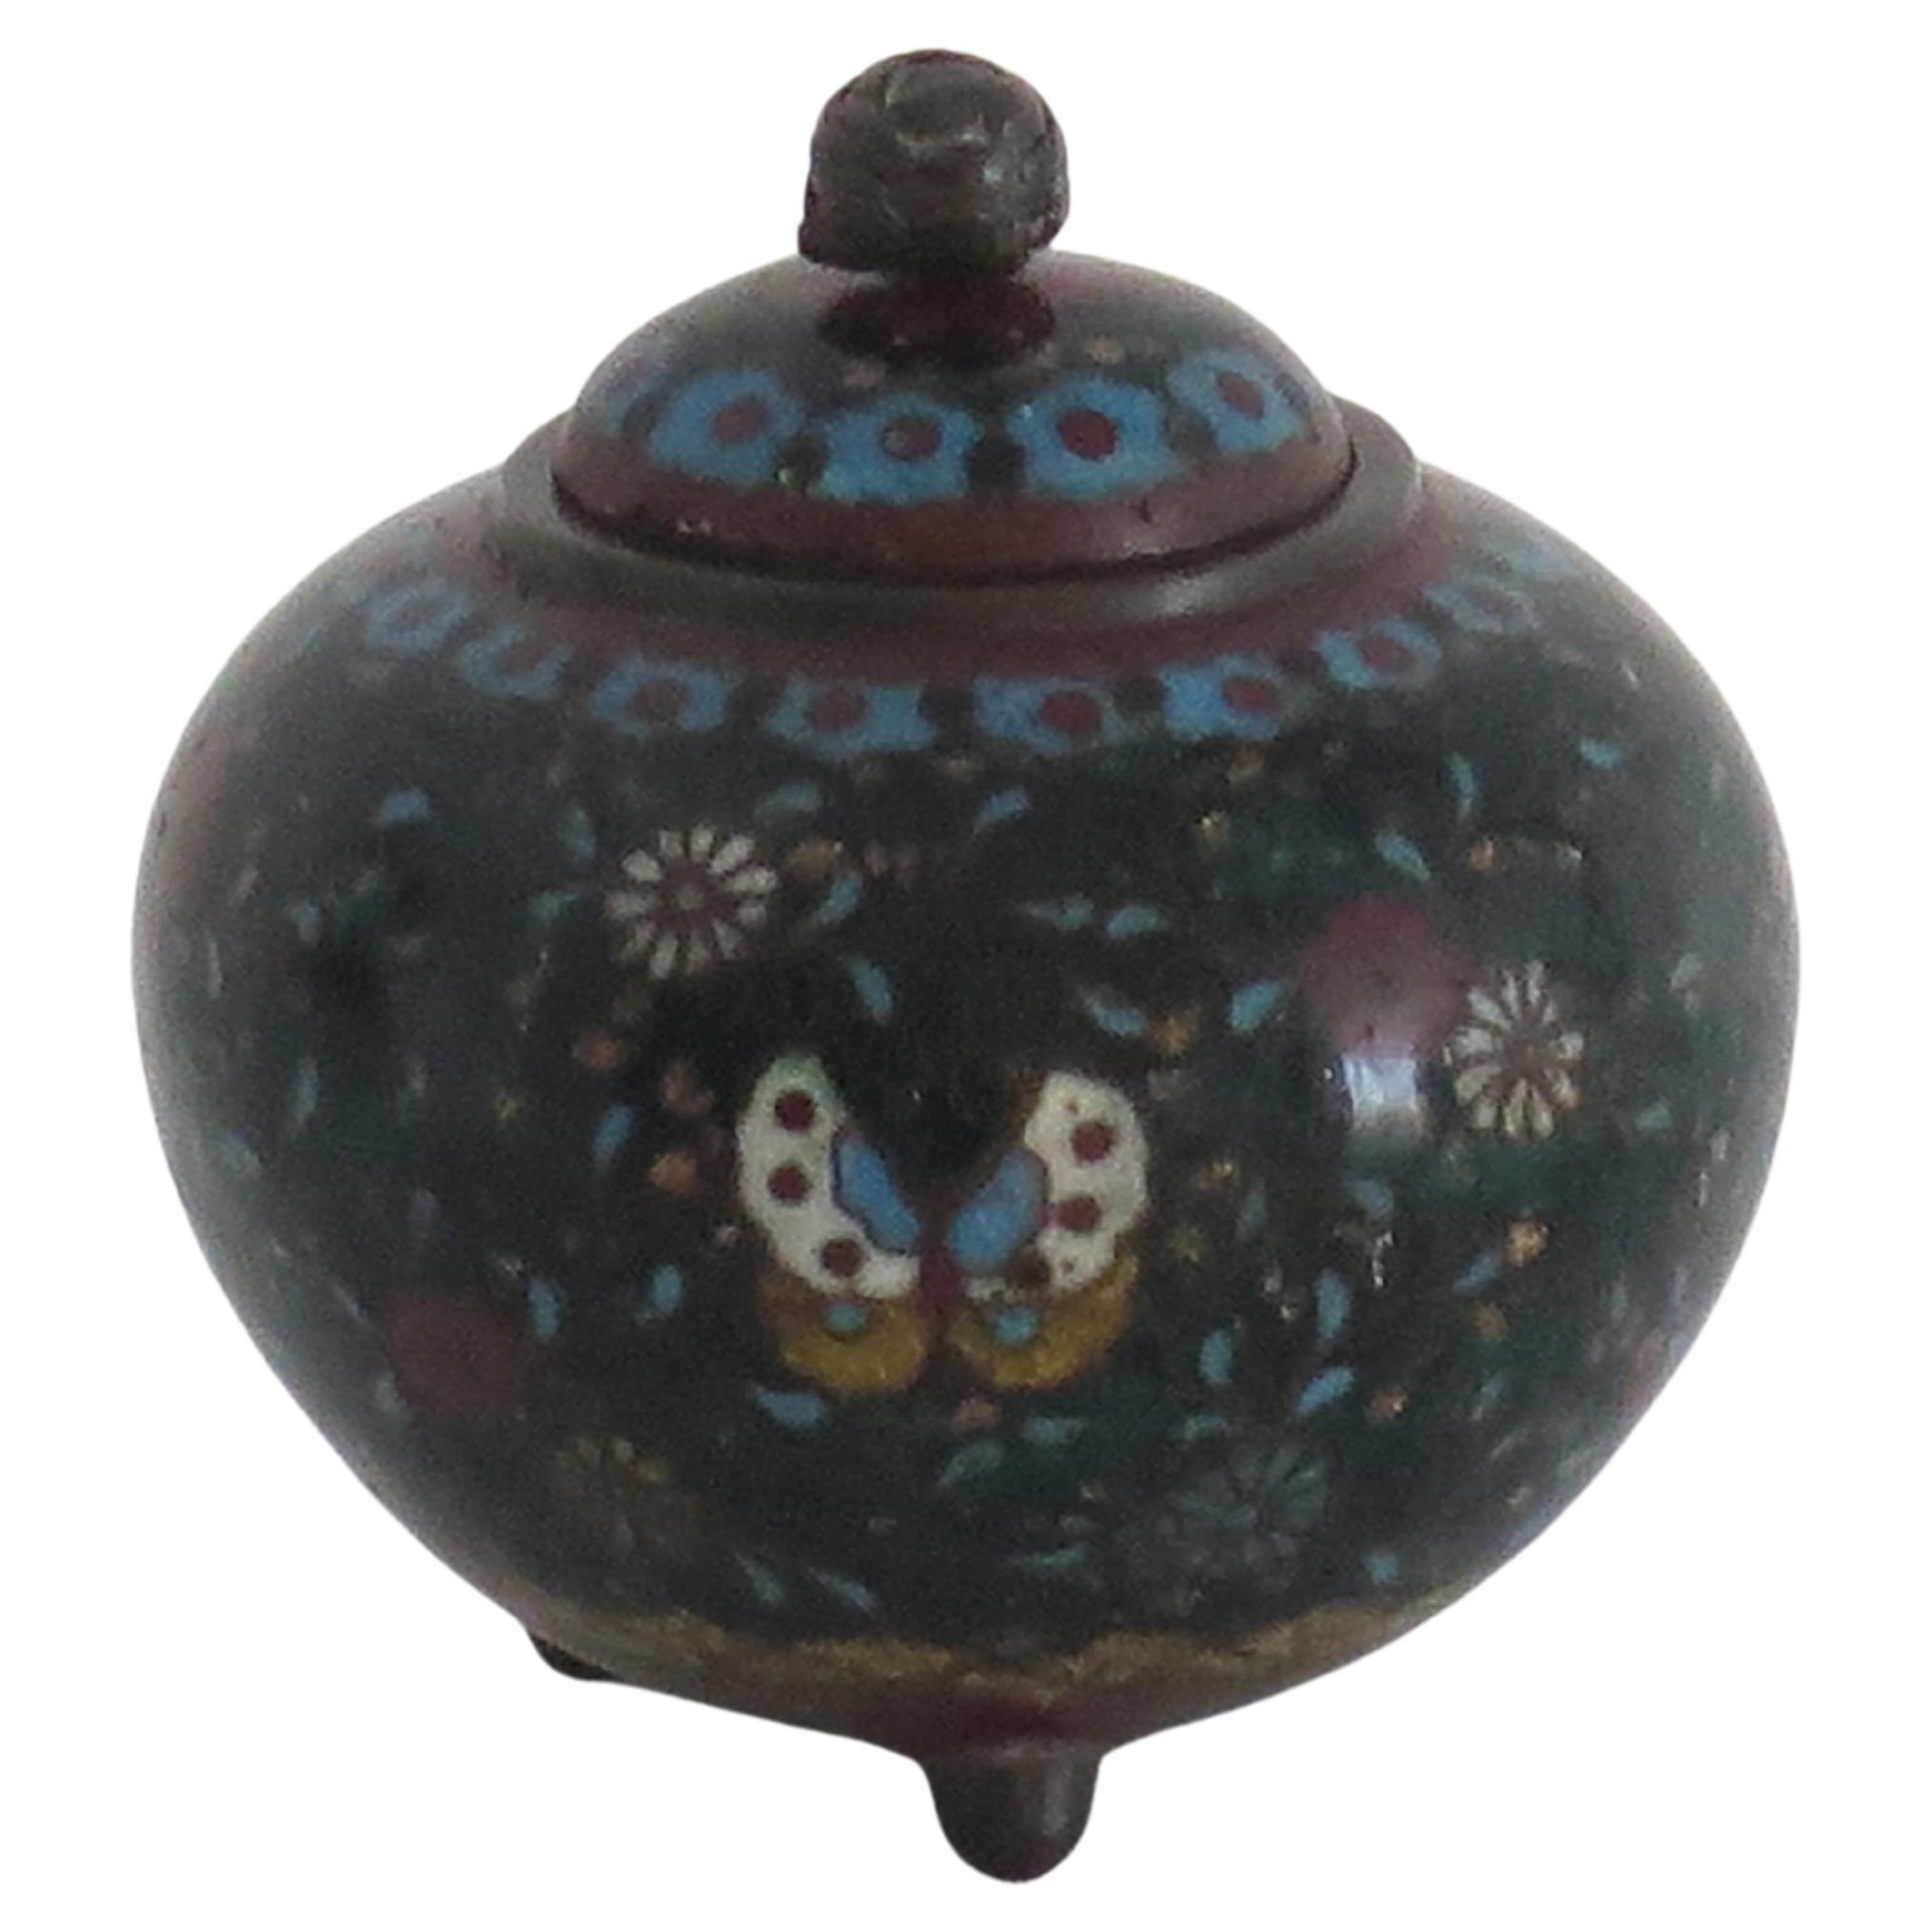 This is a very decorative cloisonné small lidded jar, made in Japan and dating to the 19th century, early Meiji period, circa 1875 or possibly earlier.

The jar has a good shape of a compressed globular form with a short neck and standing on three